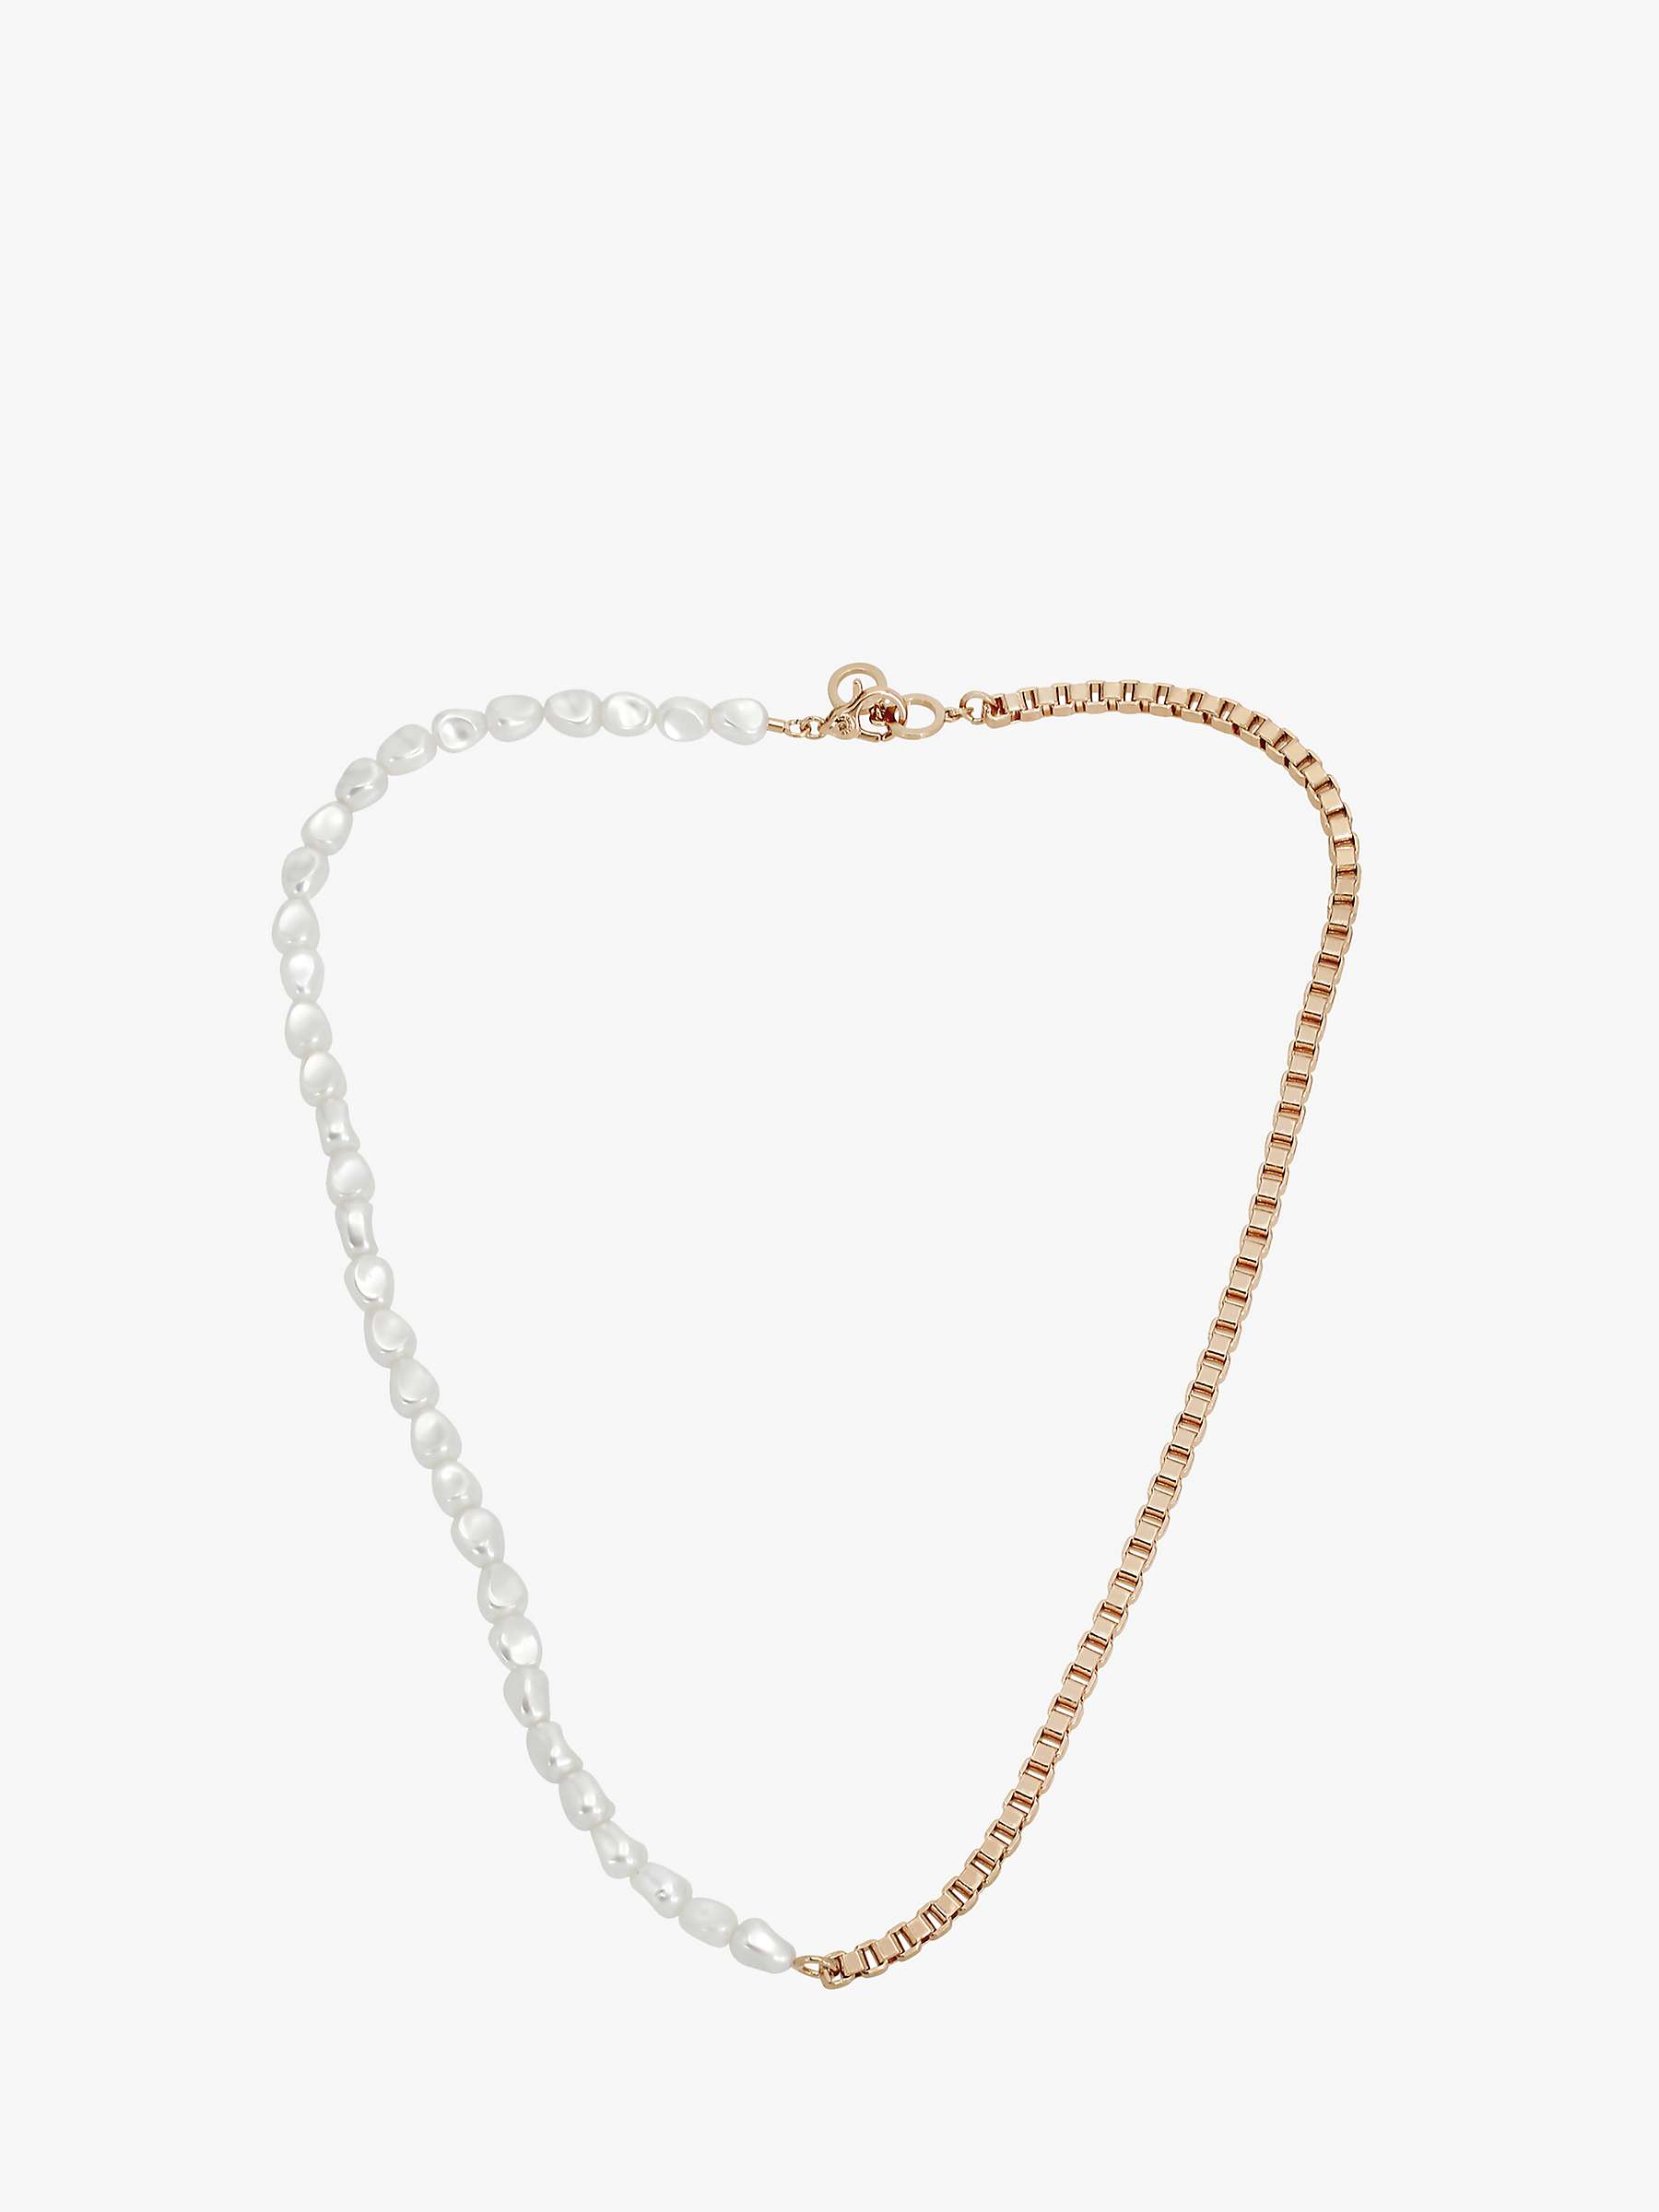 Buy AllSaints Curb Chain and Glass Bead Collar Necklace, Gold Online at johnlewis.com